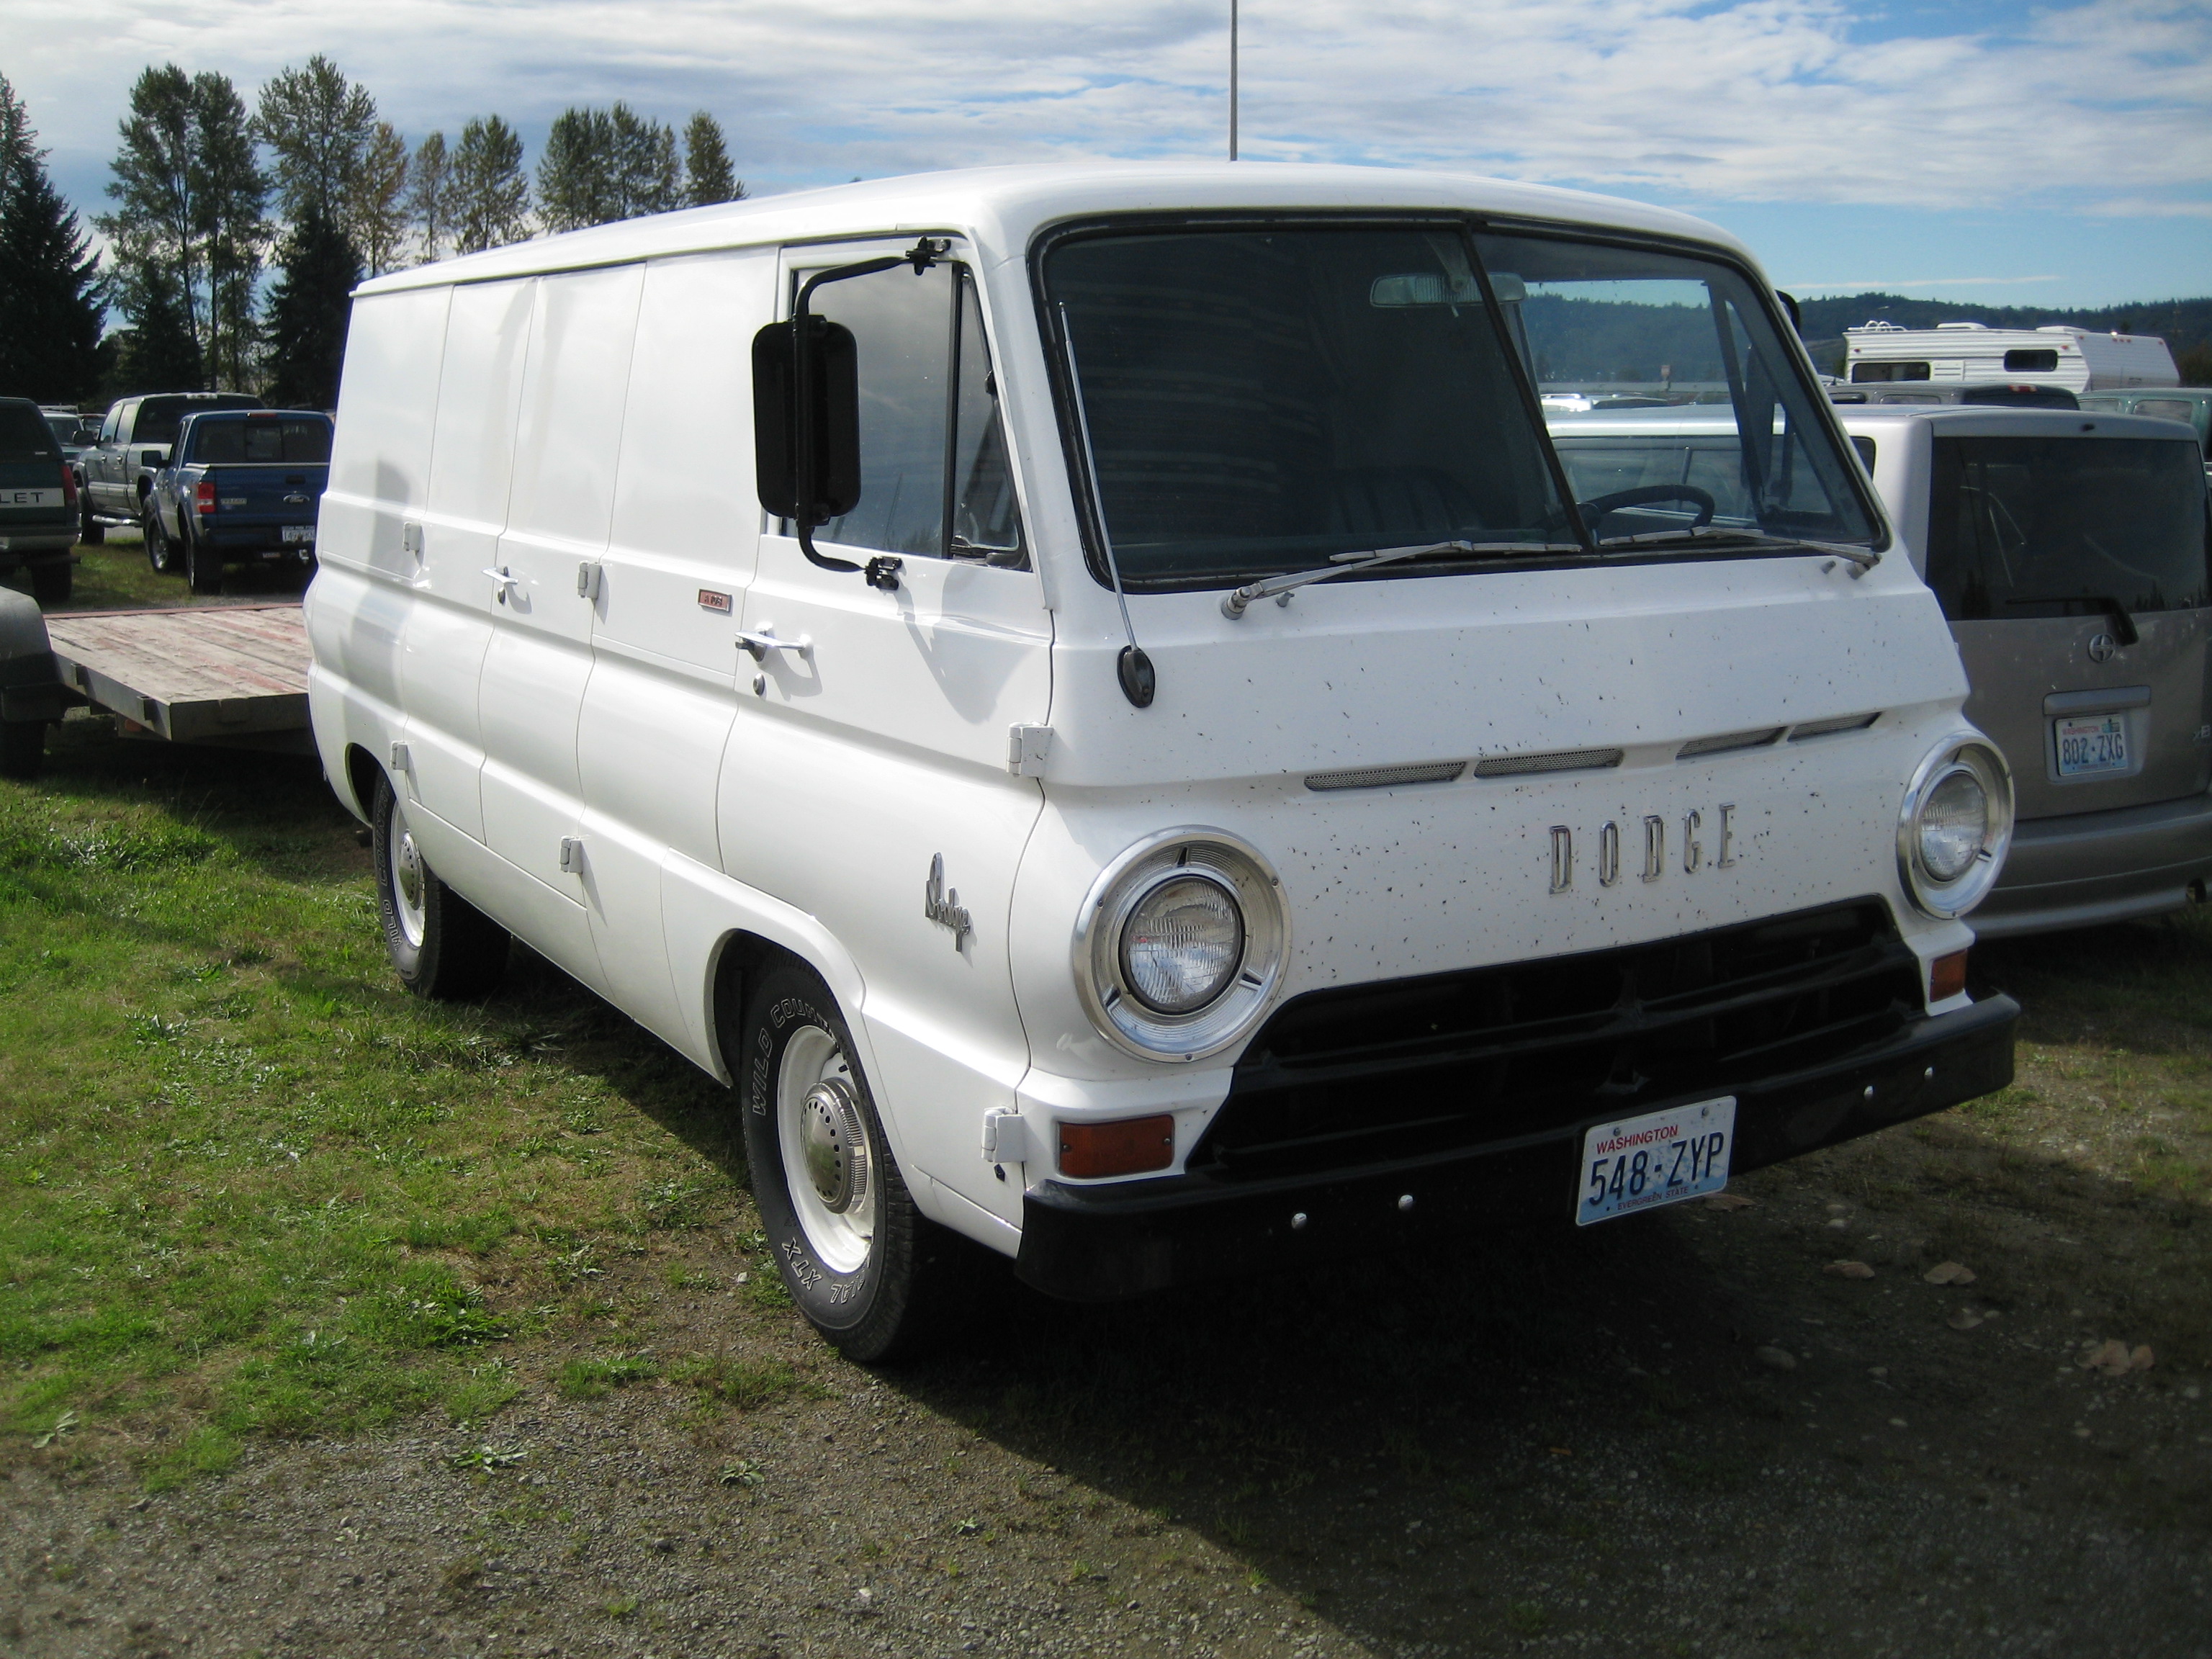 Dodge A100 | Flickr - Photo Sharing!